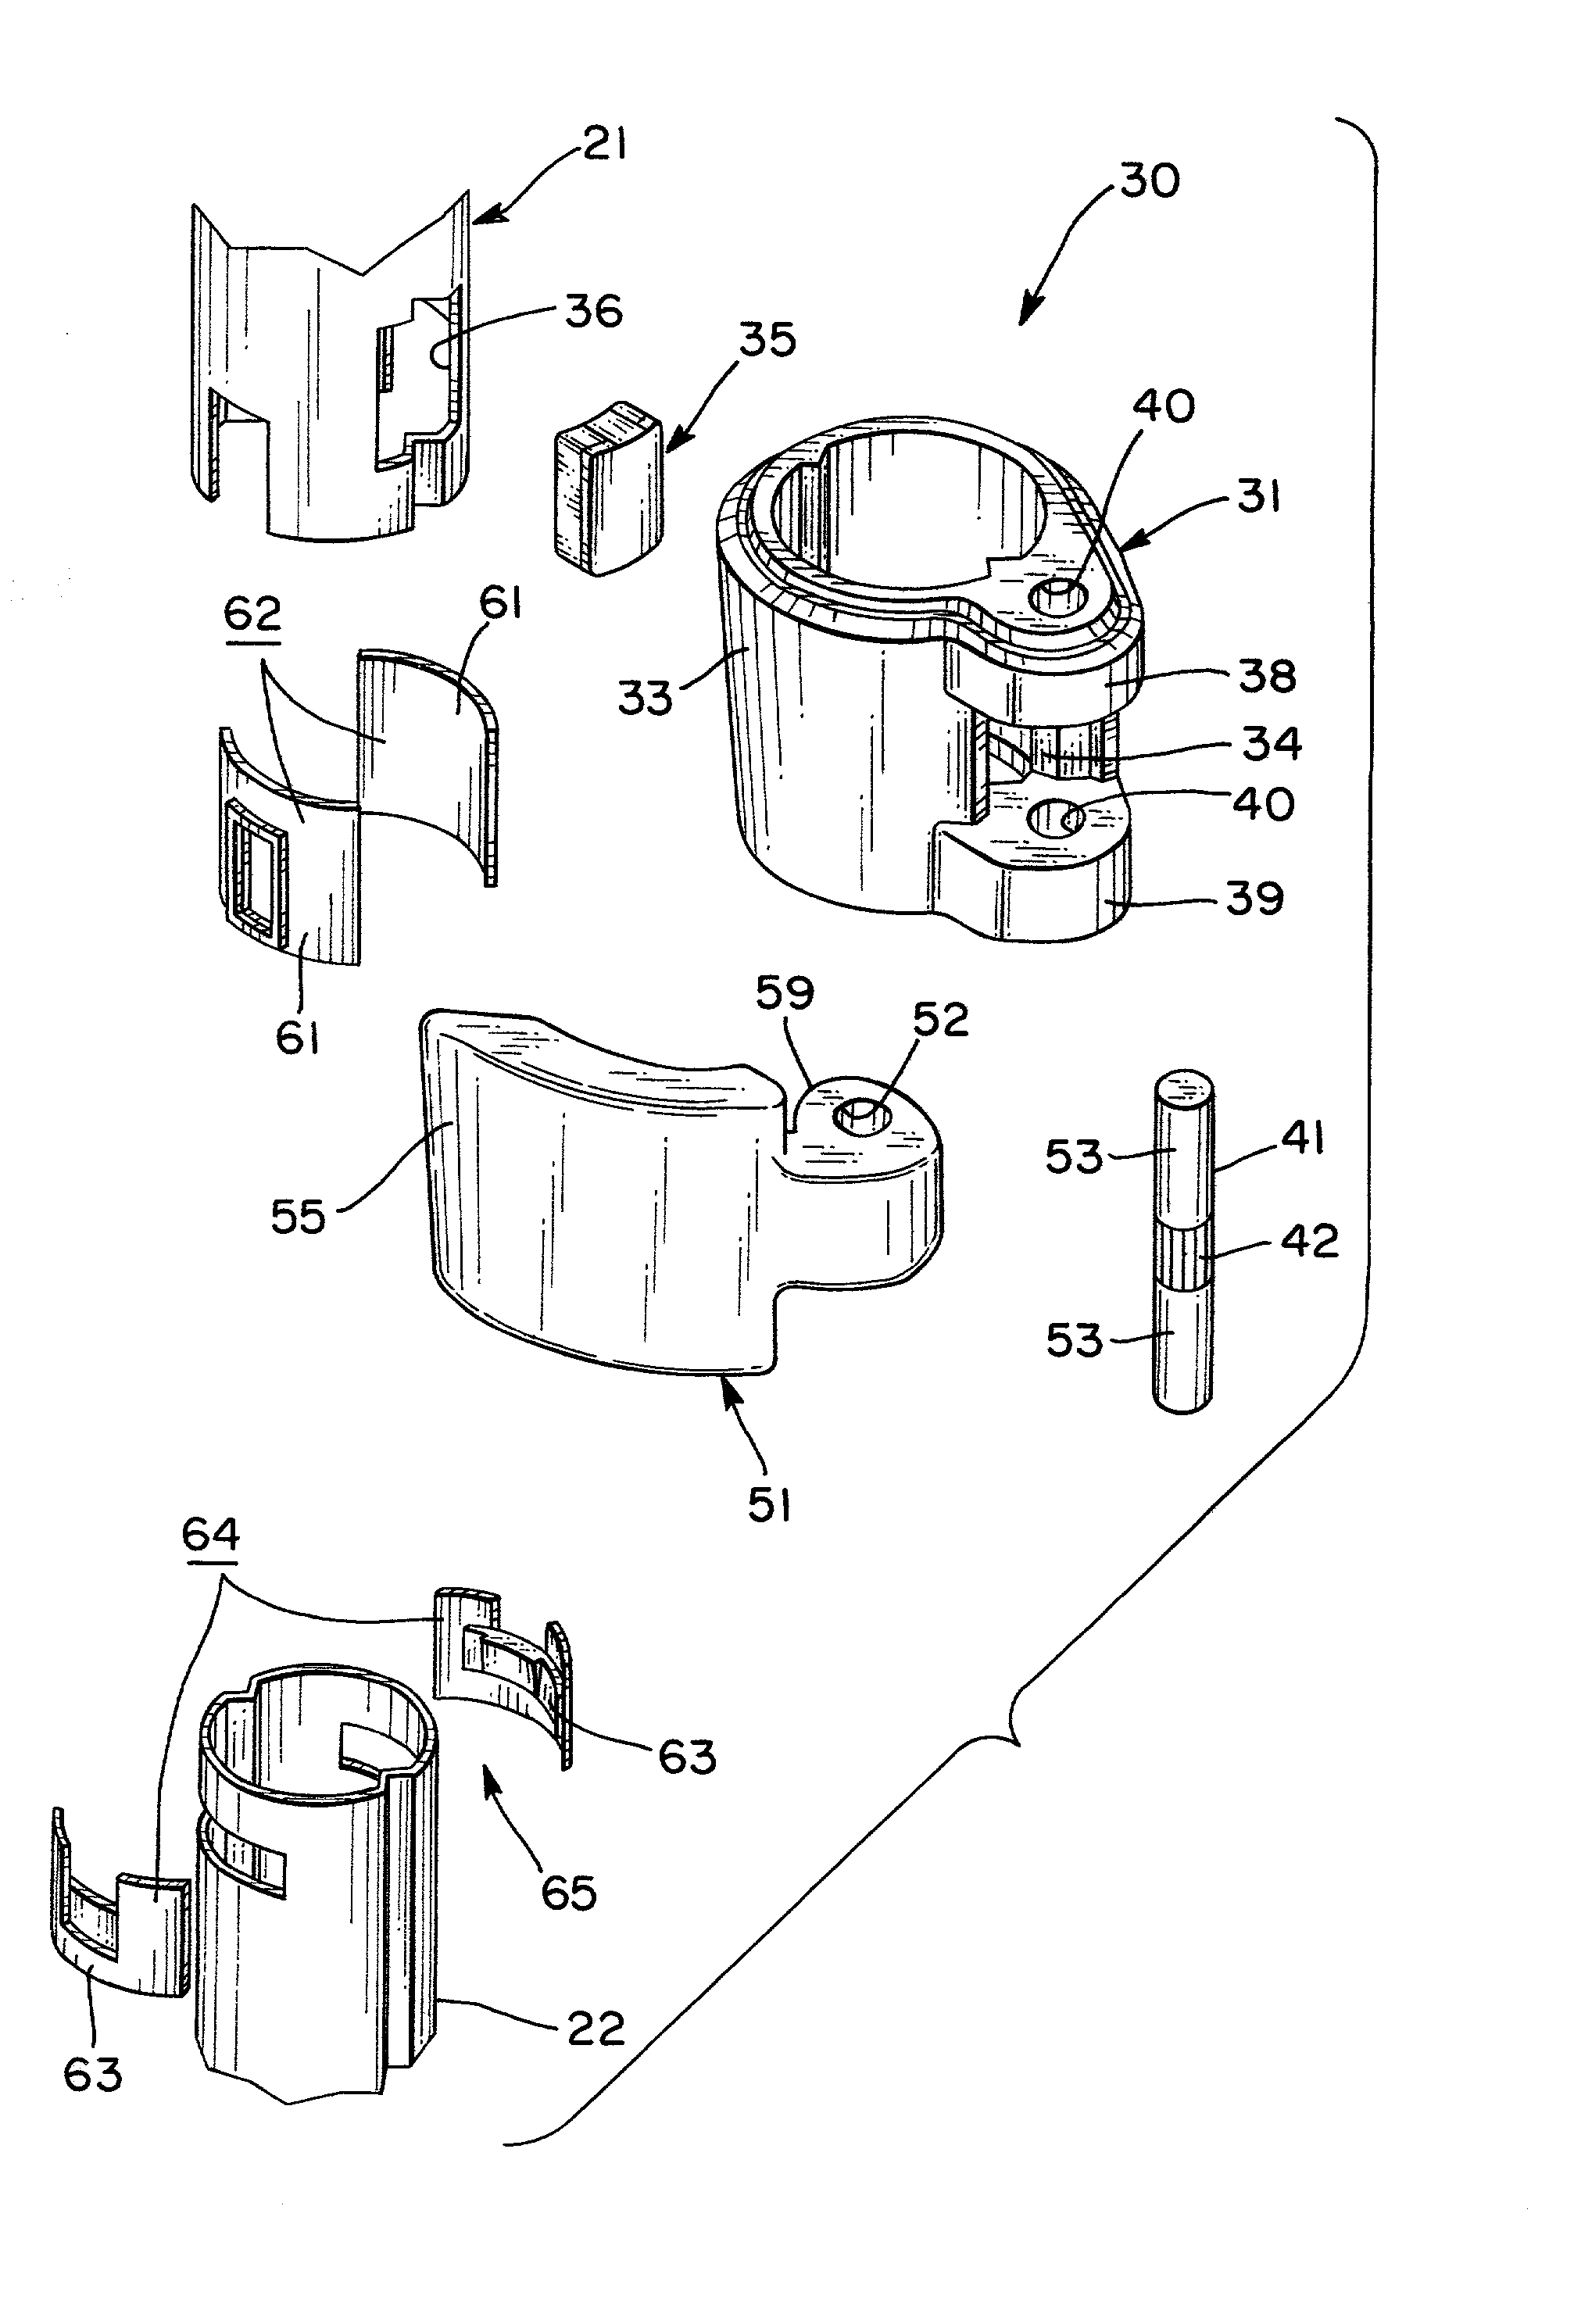 Stopper device and telescopic unit